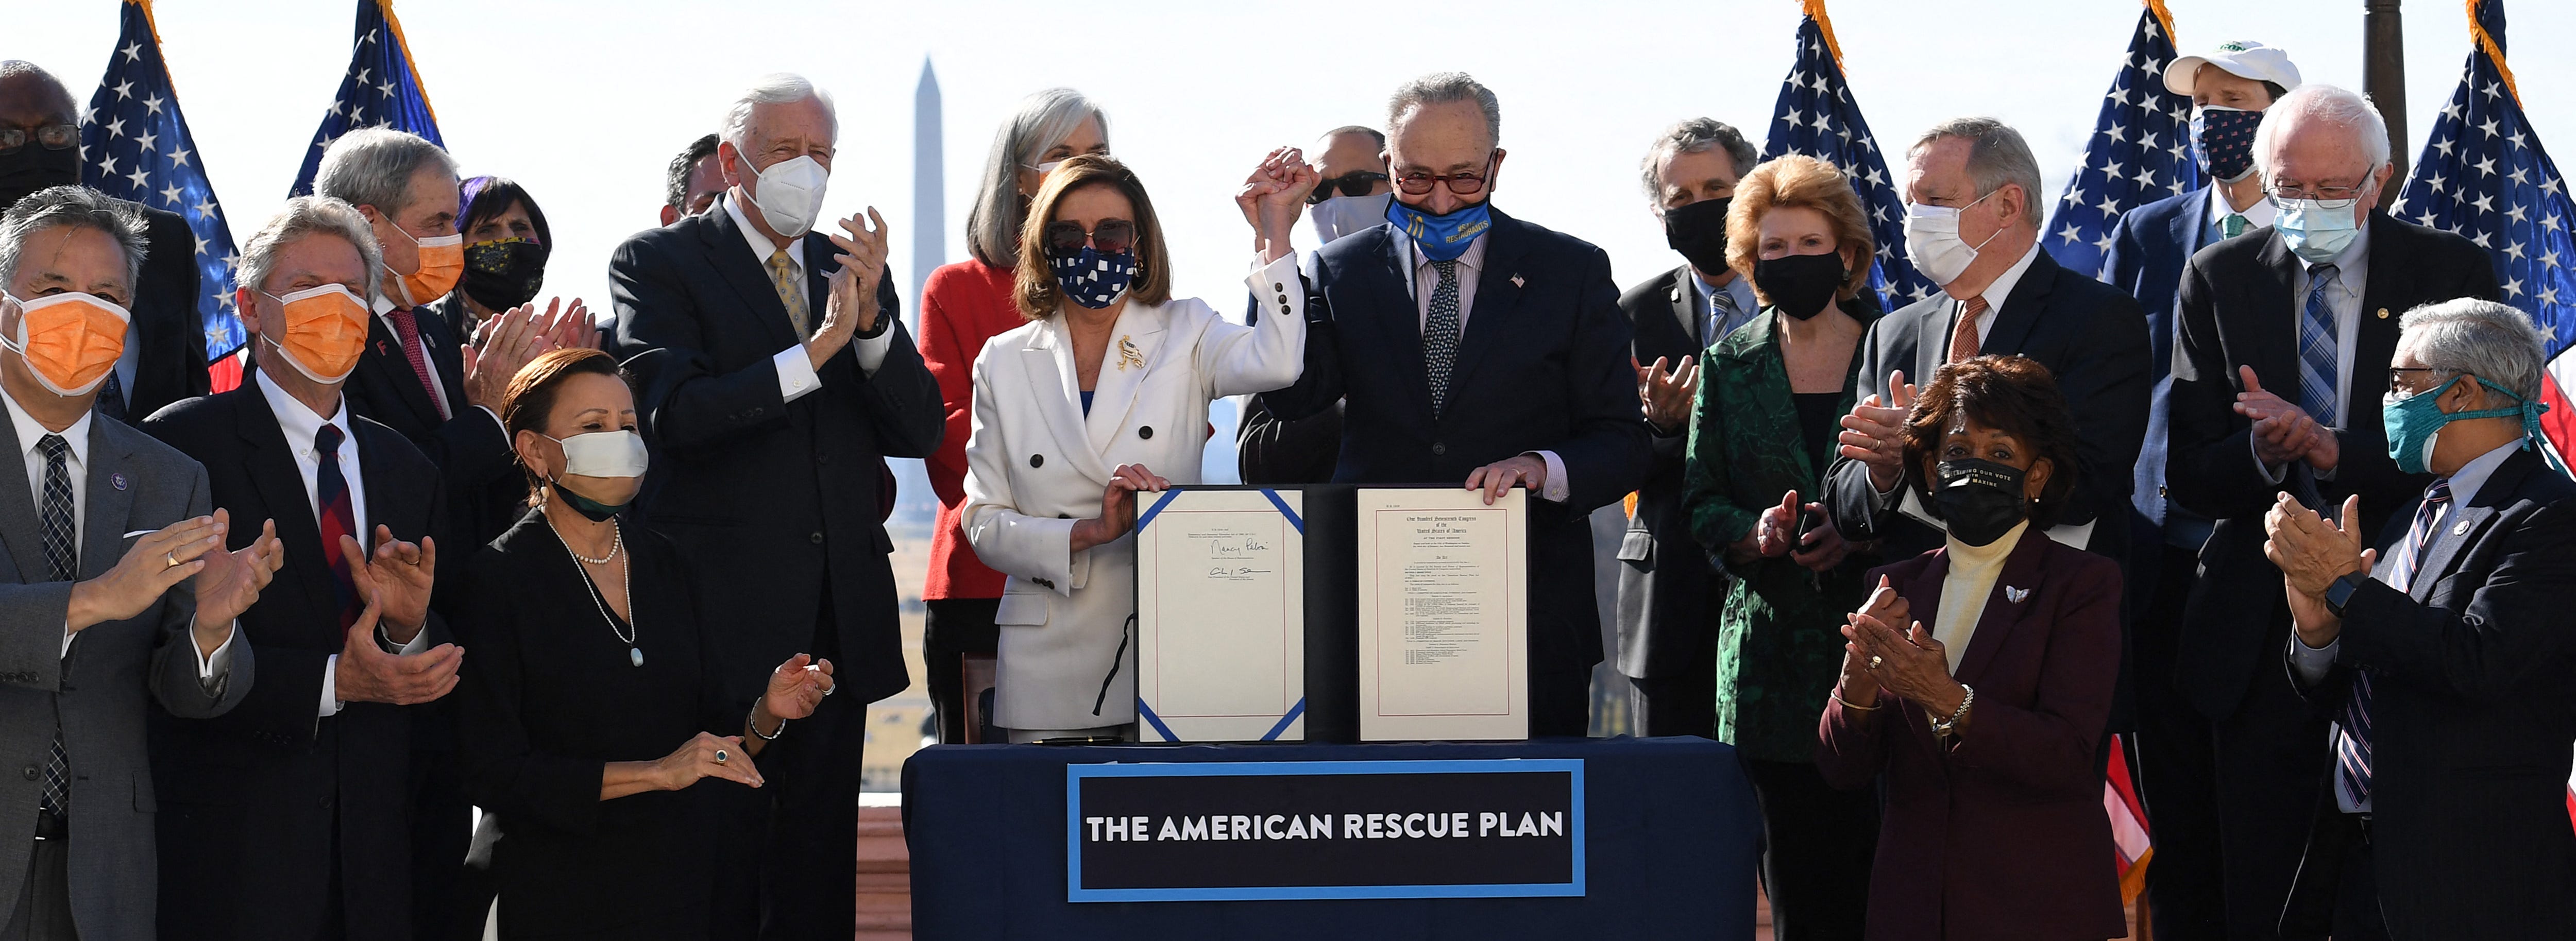 Speaker of the House Nancy Pelosi and Senate Majority Leader Chuck Schumer hold the signed American Rescue Plan Act after the House Chamber voted on the final revised legislation of the $1.9 trillion COVID-19 relief plan, at the U.S. Capitol on March 10, 2021, in Washington.